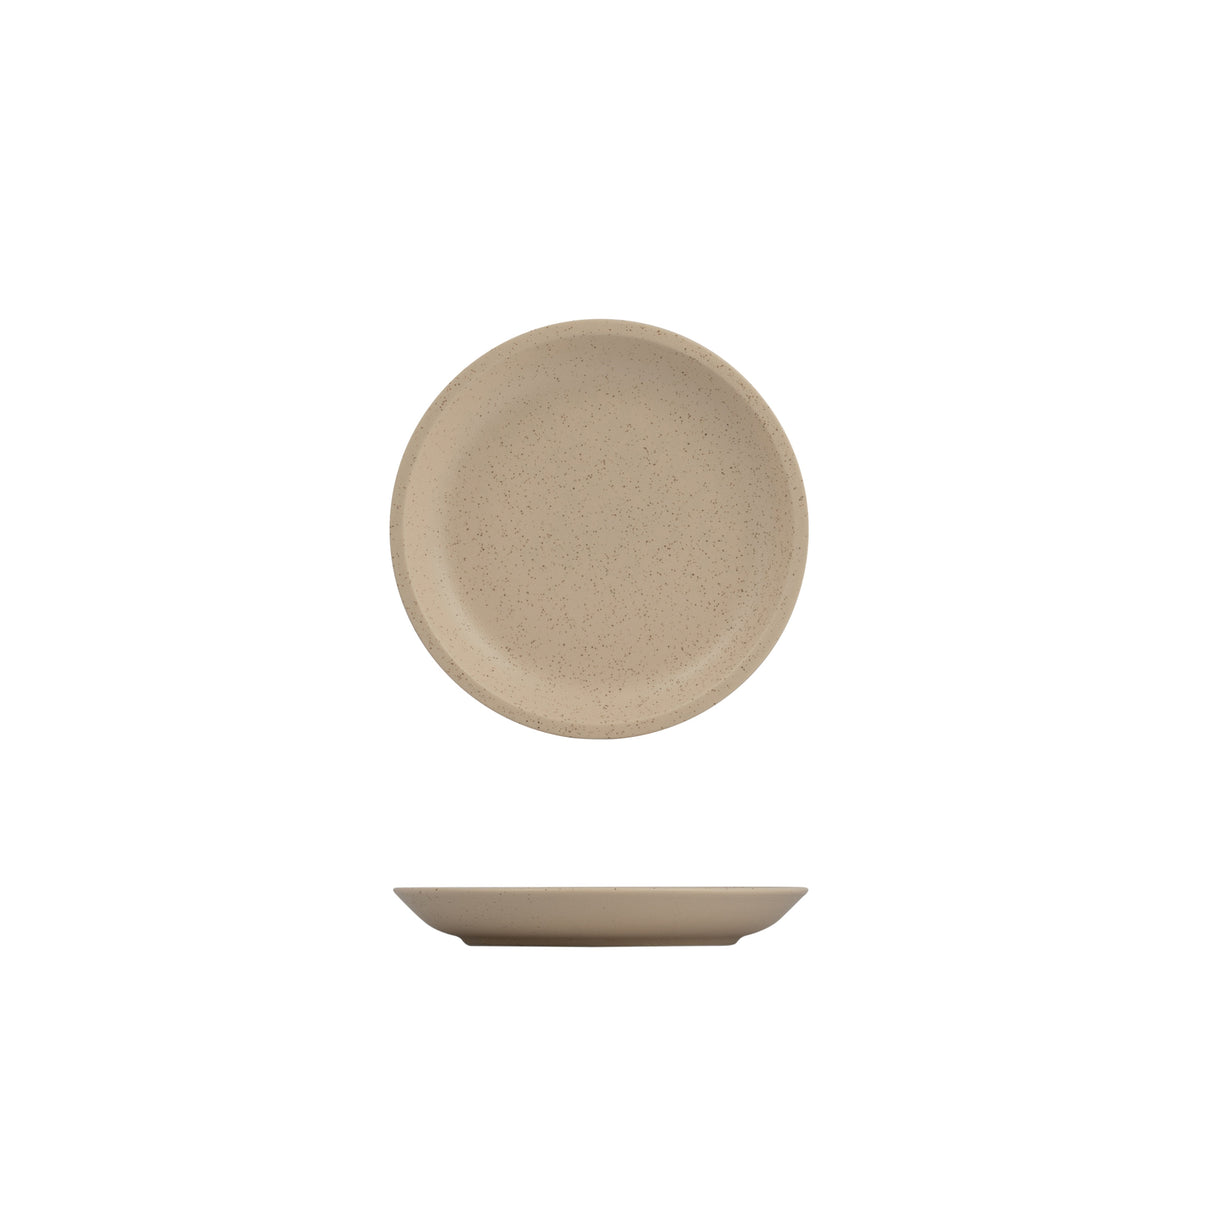 Round Plate 173Mm, Clay from Luzerne. Sold in boxes of 6. Hospitality quality at wholesale price with The Flying Fork! 